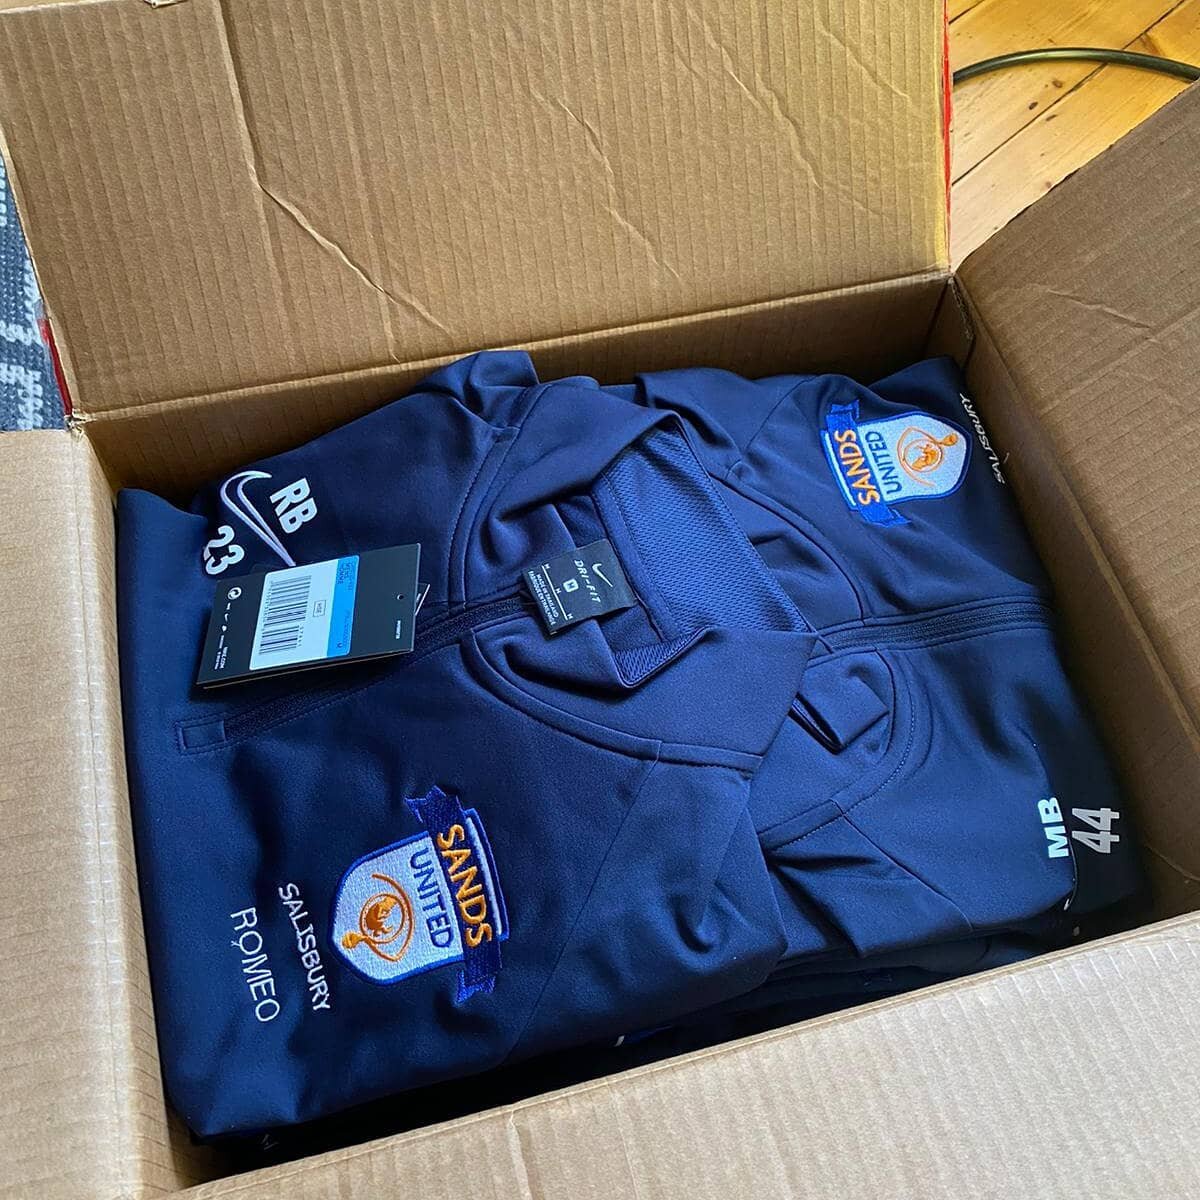 The WhatsApp group has been blowing up with excitement today.

Not just that training is back tomorrow but our training tops have arrived from @mdhteamwearandtrophies 😍

What's the phrase again...... All the gear..... 🤔

#sandsunited #sufcsalisbury